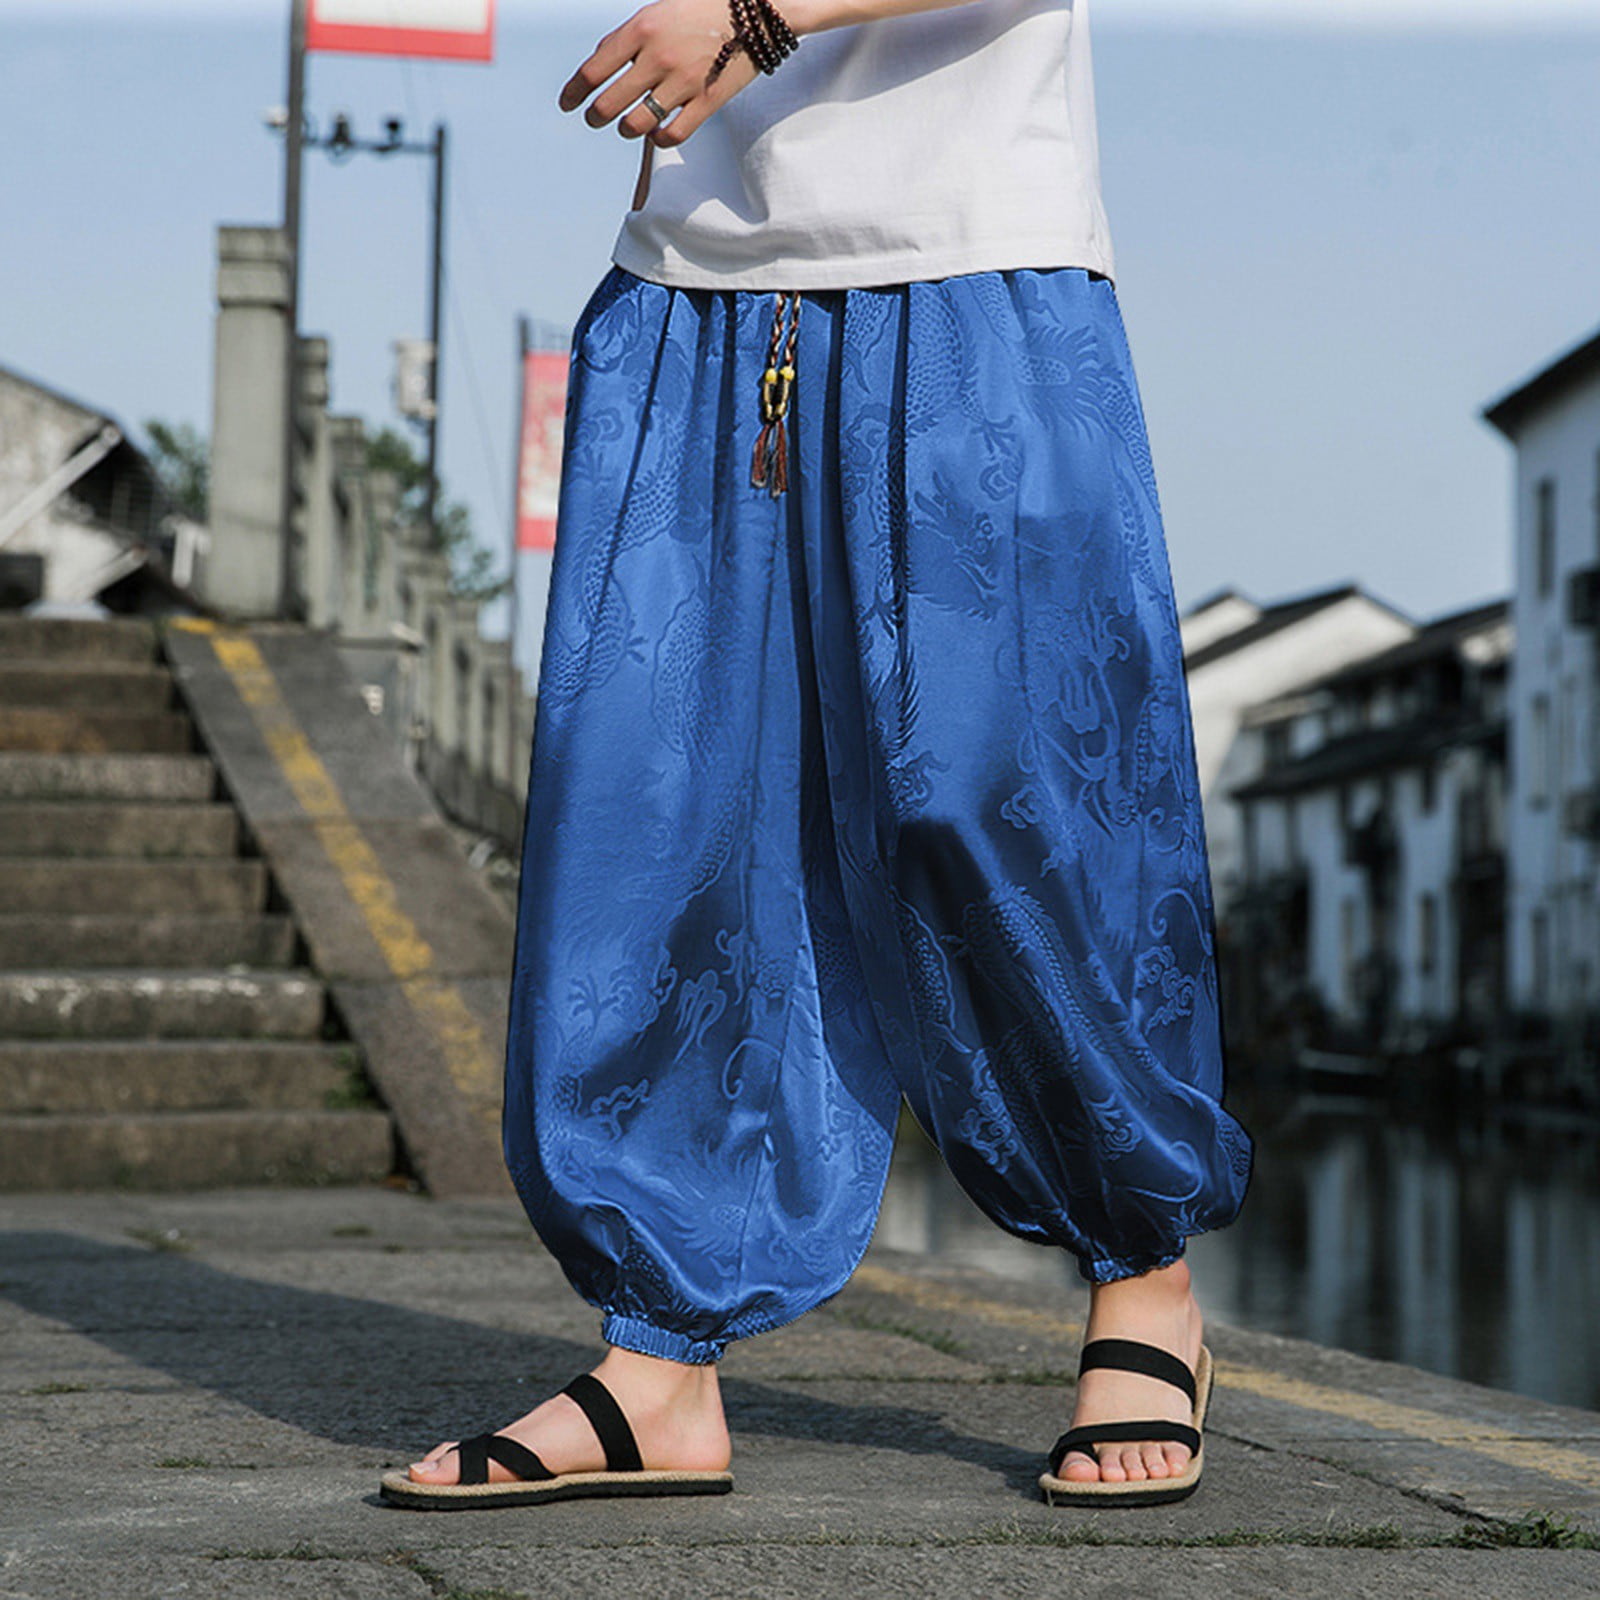 Men's Blue Trousers | Chinos & Jeans Styles | Next